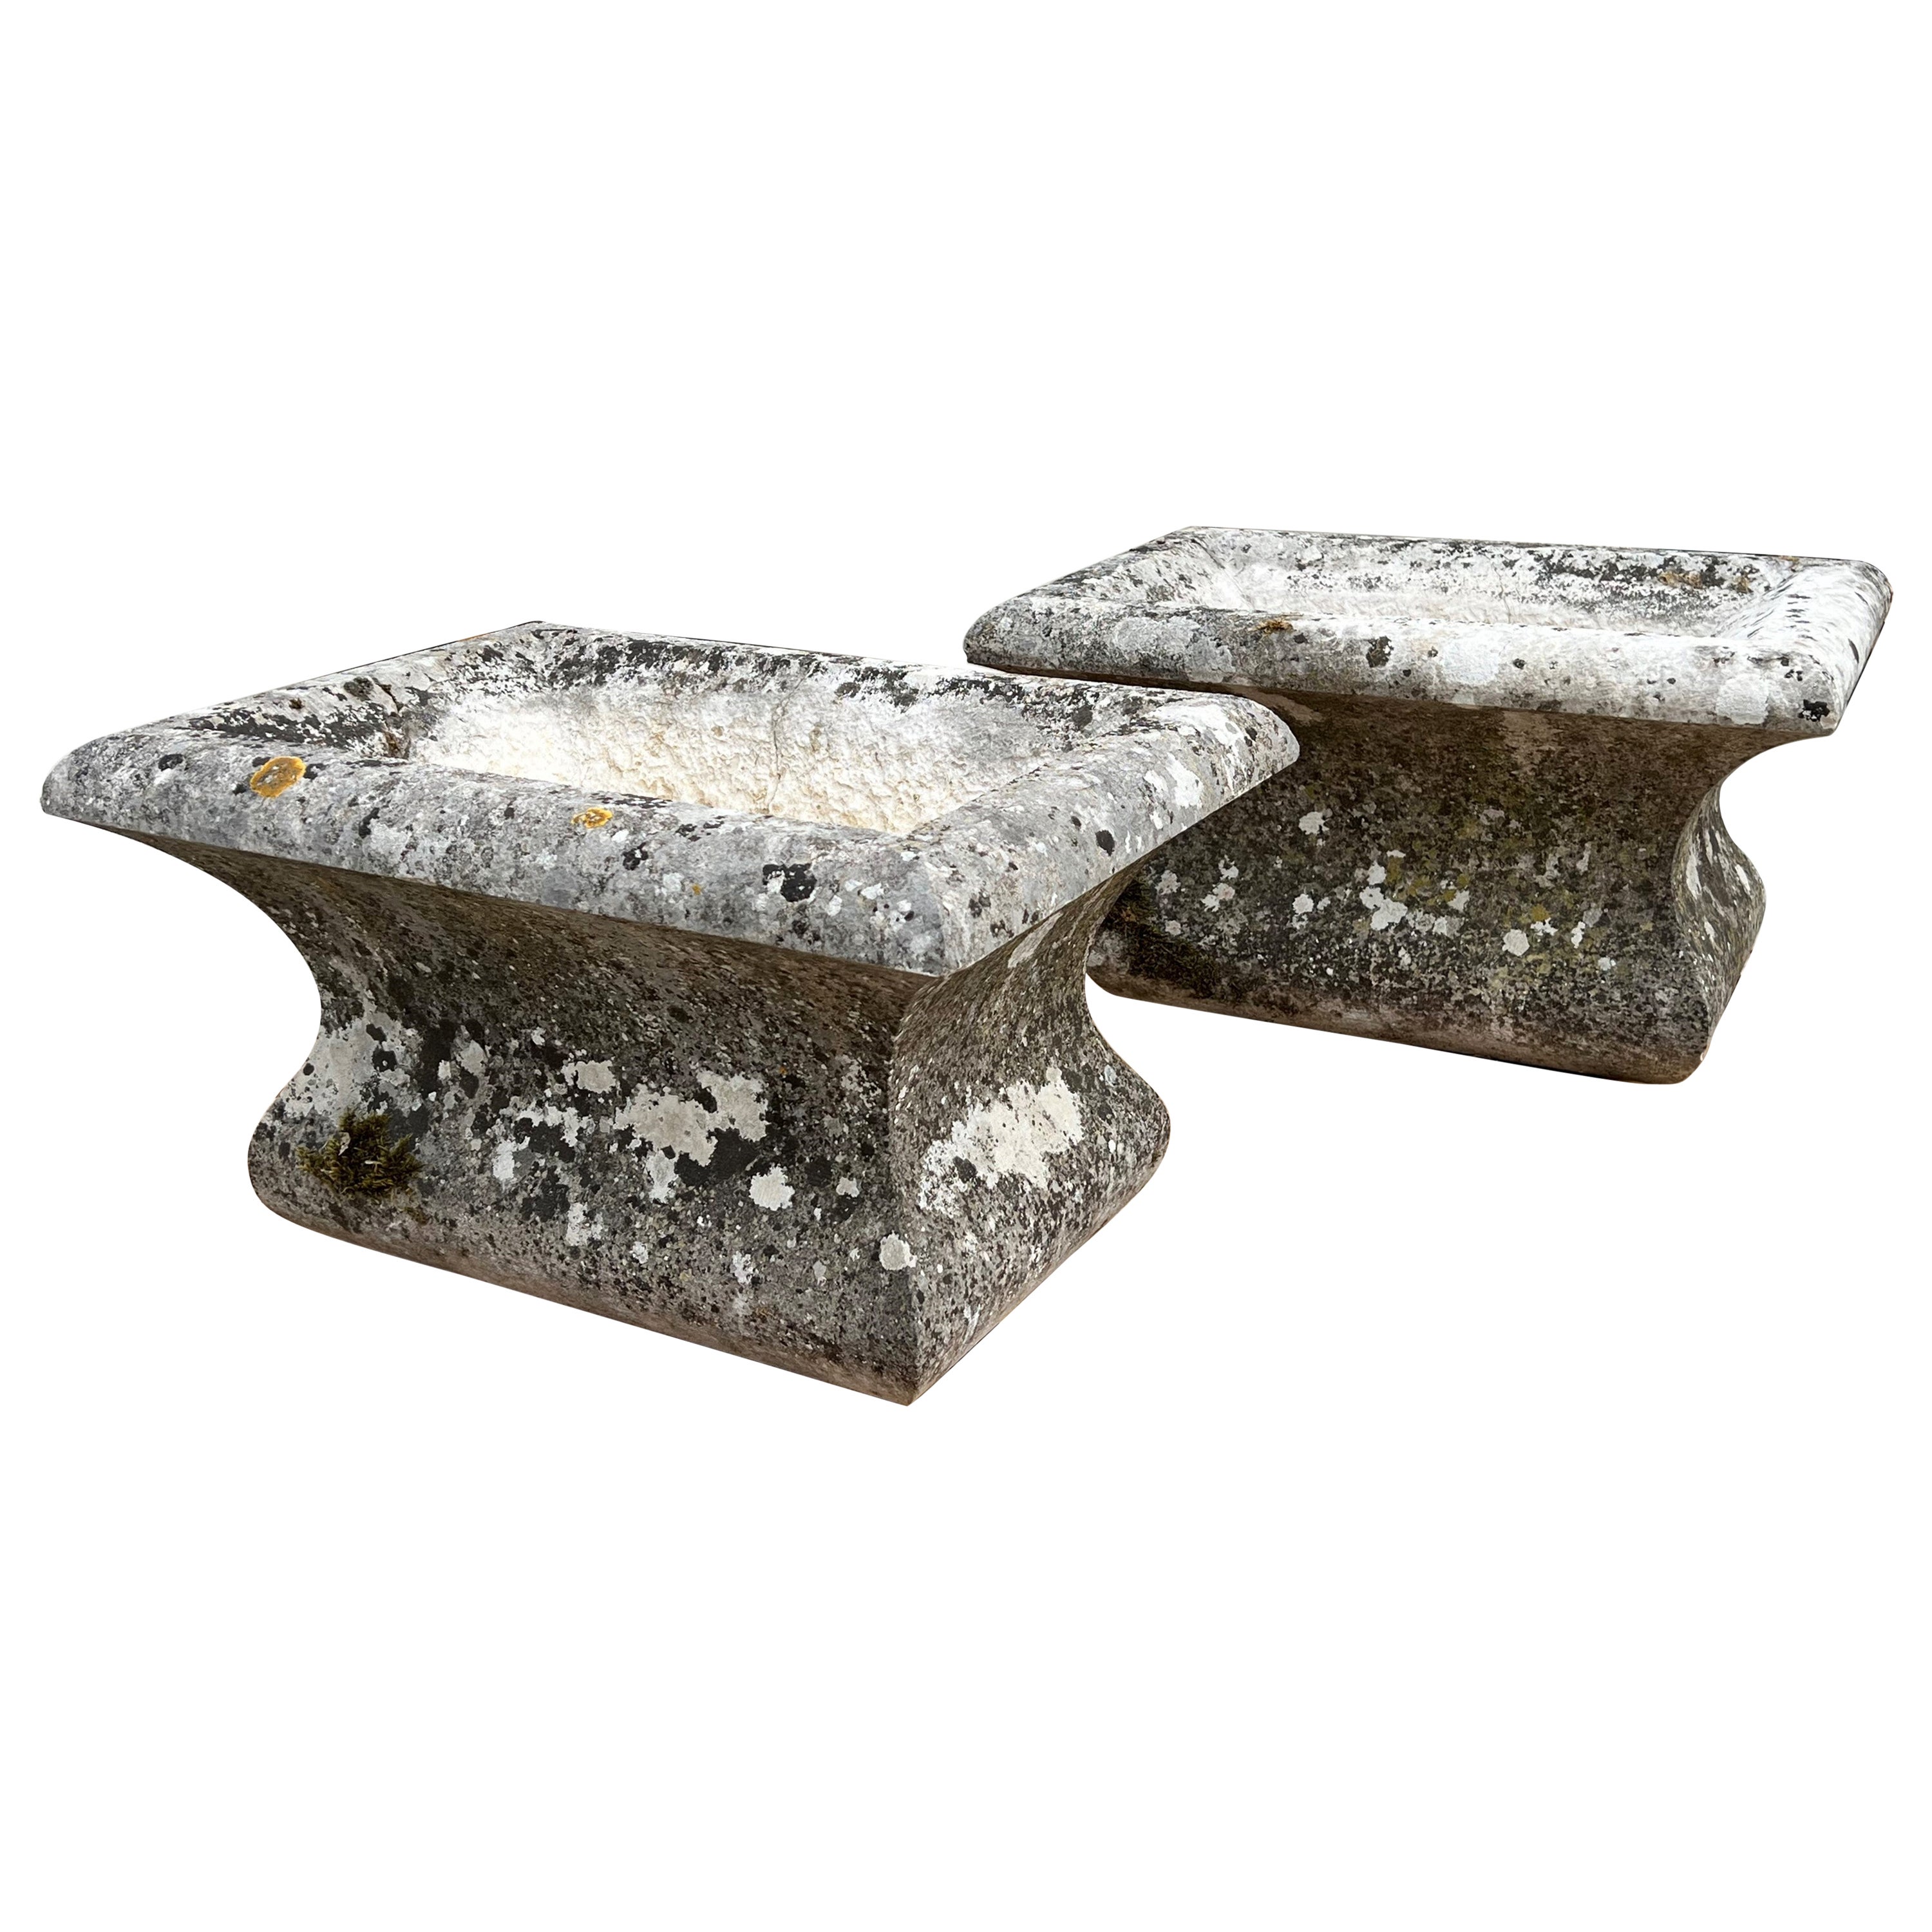 Pair of 19th Century Carved Stone Jardiniere Planters from Dijon, France For Sale